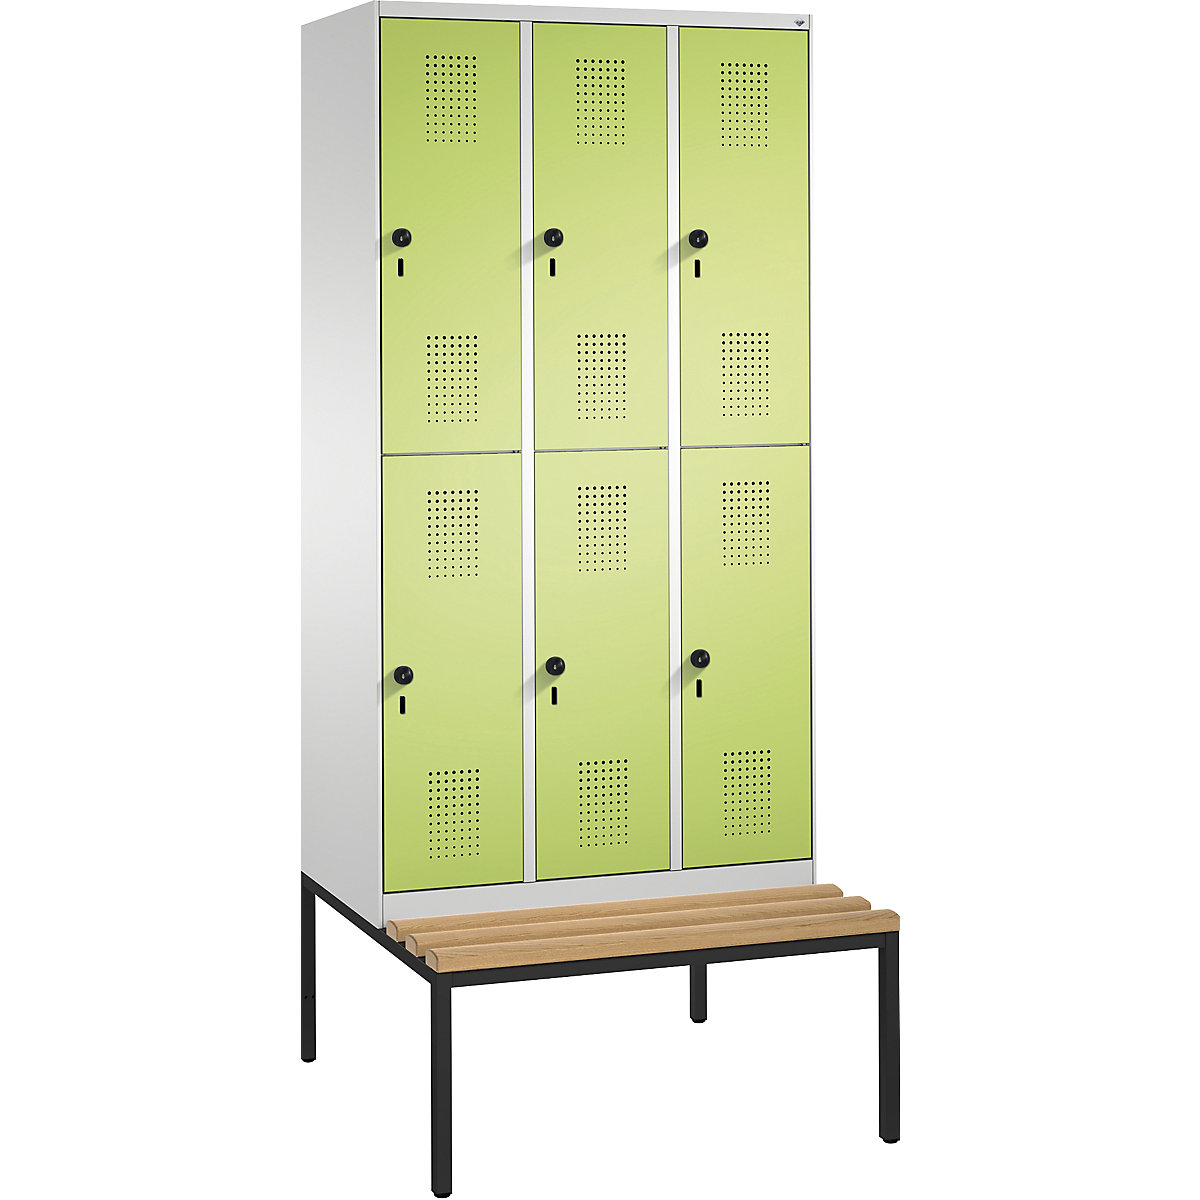 EVOLO cloakroom locker, double tier, with bench – C+P, 3 compartments, 2 shelf compartments each, compartment width 300 mm, light grey / viridian green-7